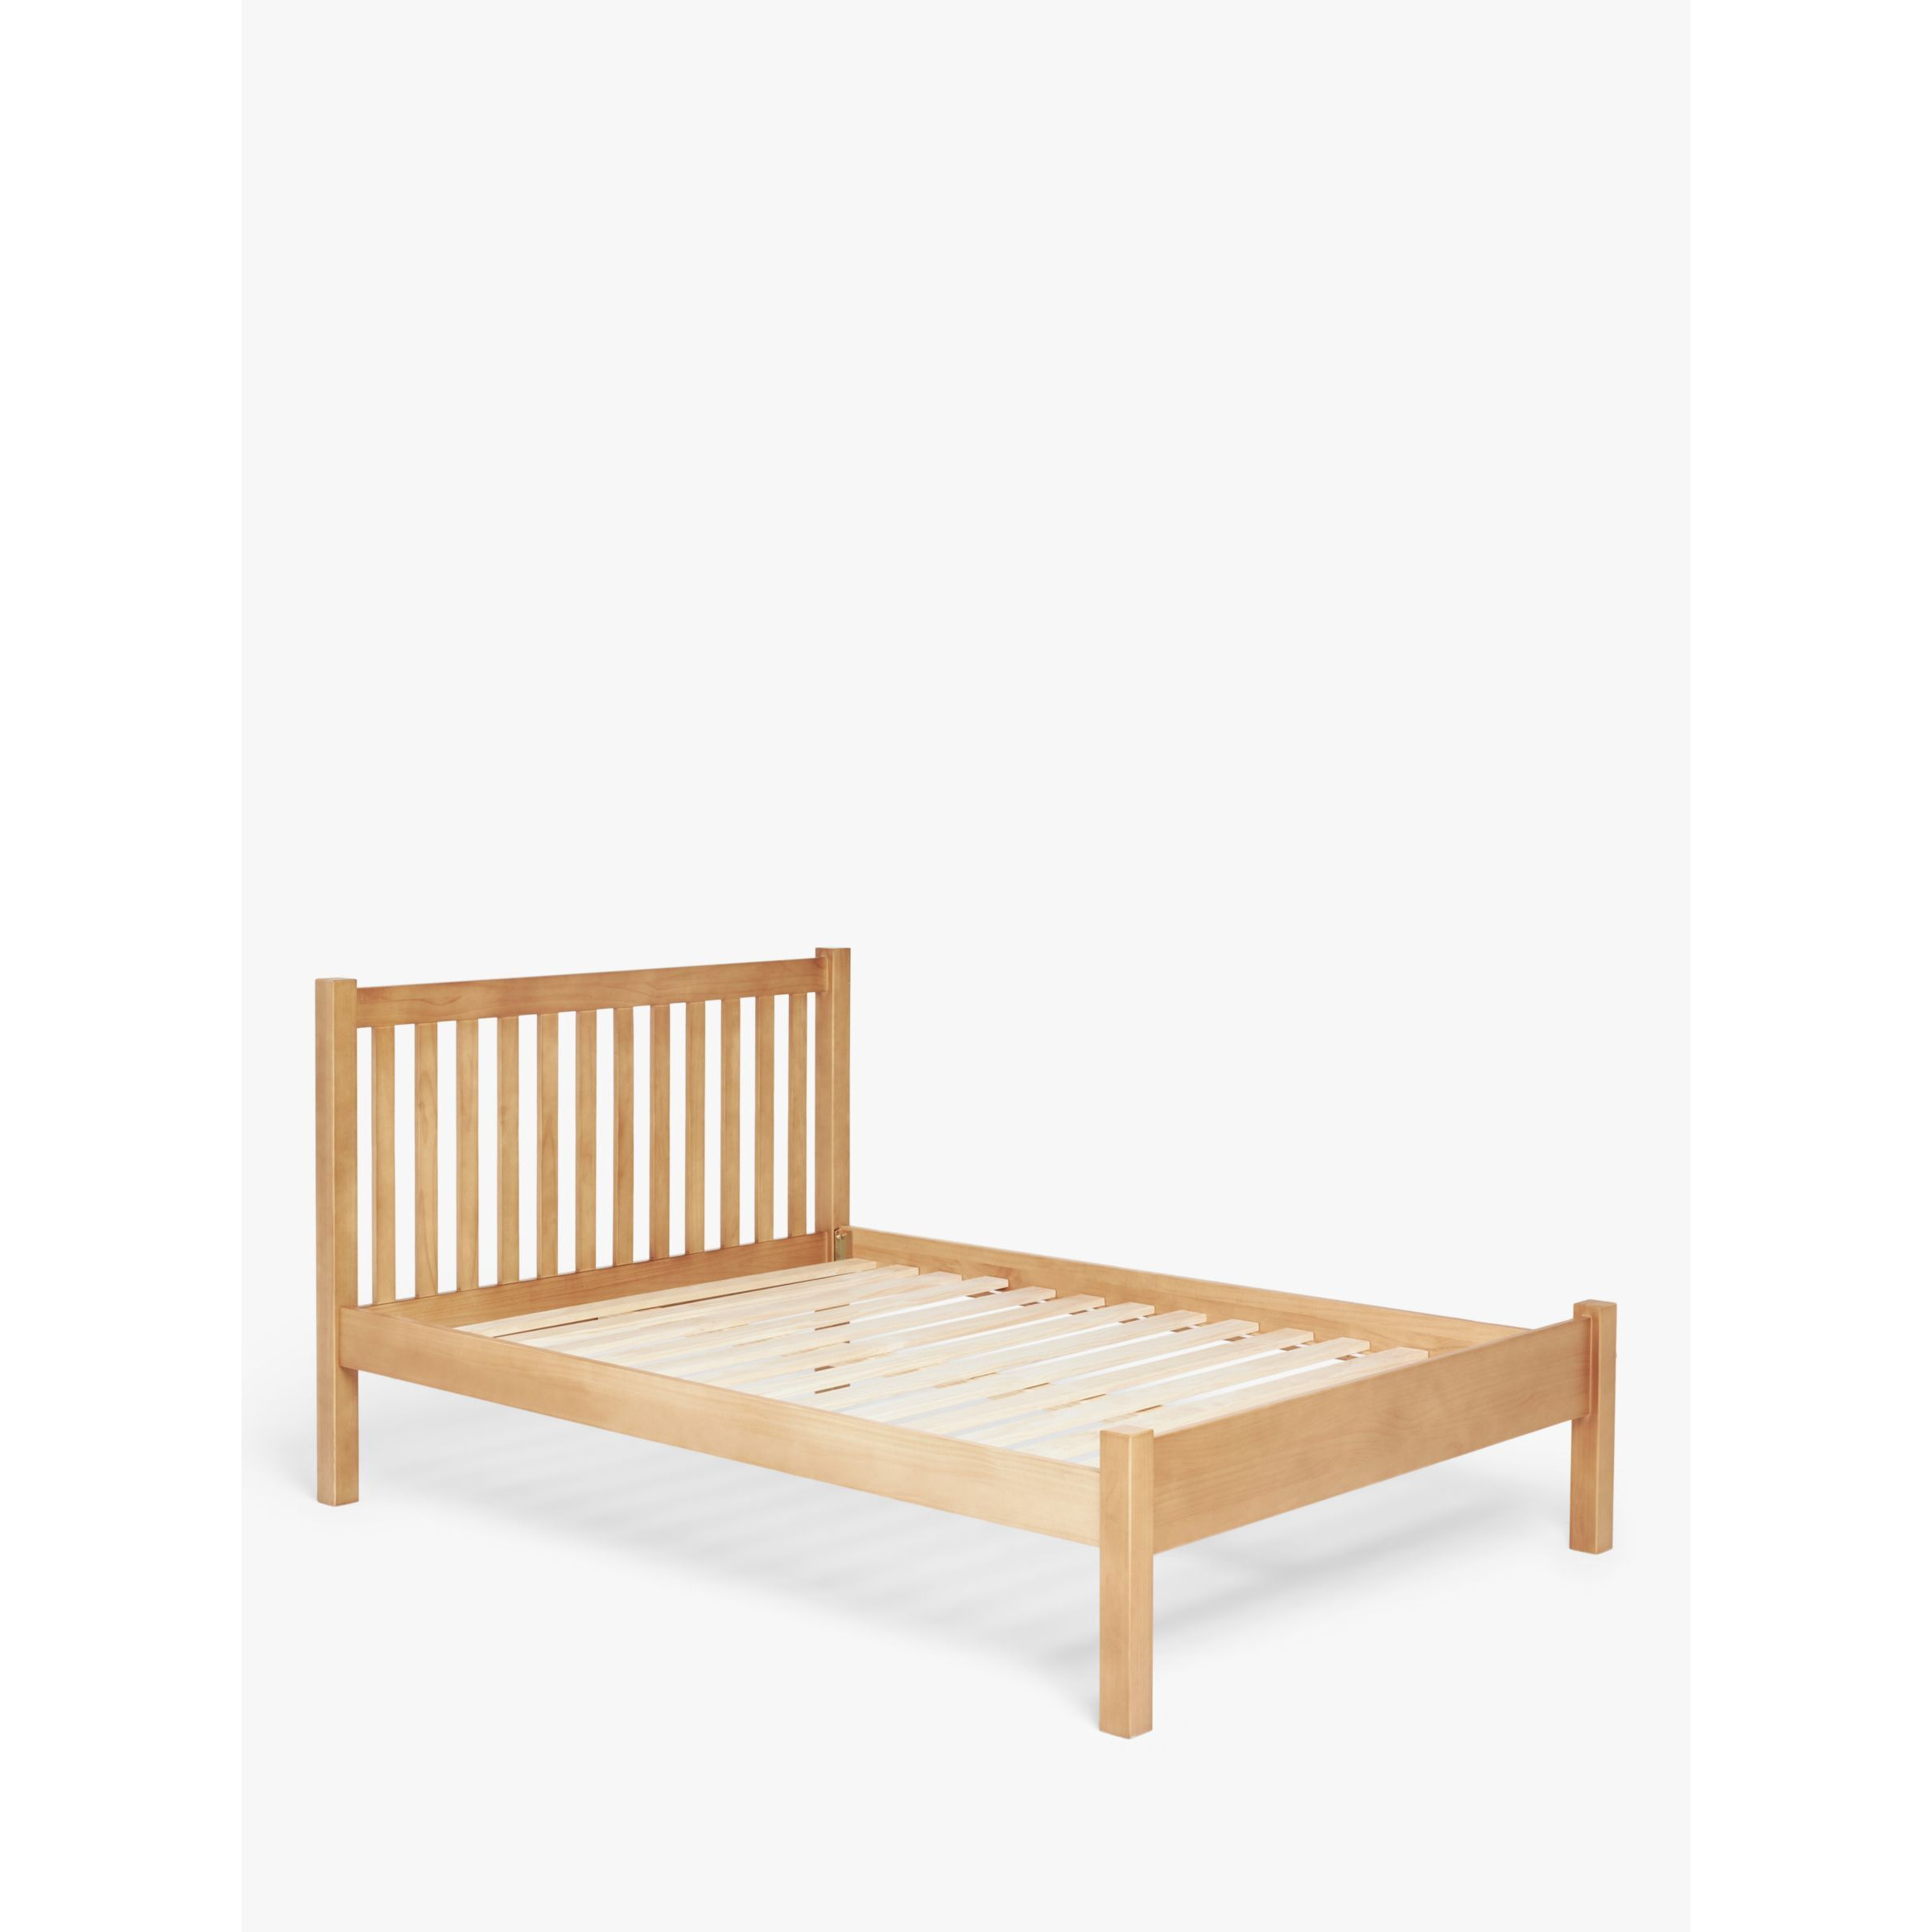 John Lewis ANYDAY Wilton Bed Frame, Double - image 1